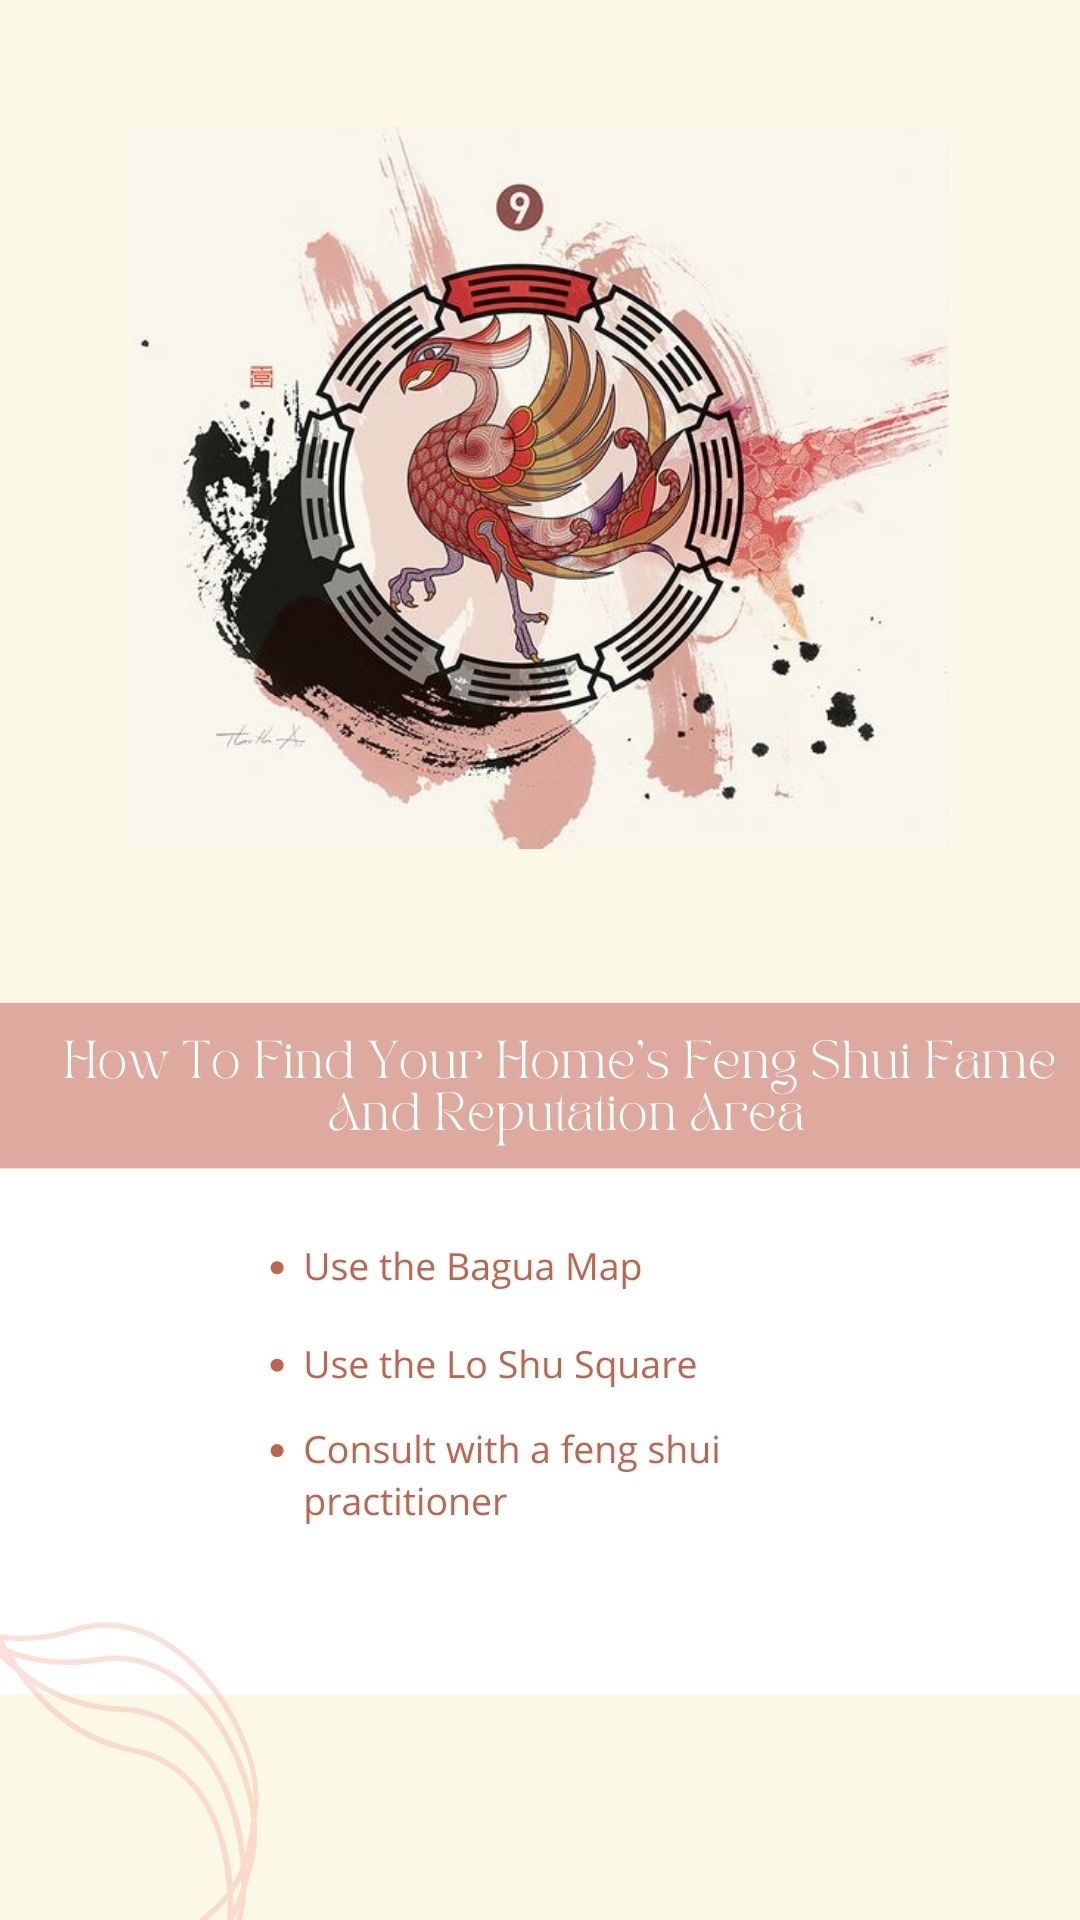 Find Your Home's Feng Shui Fame